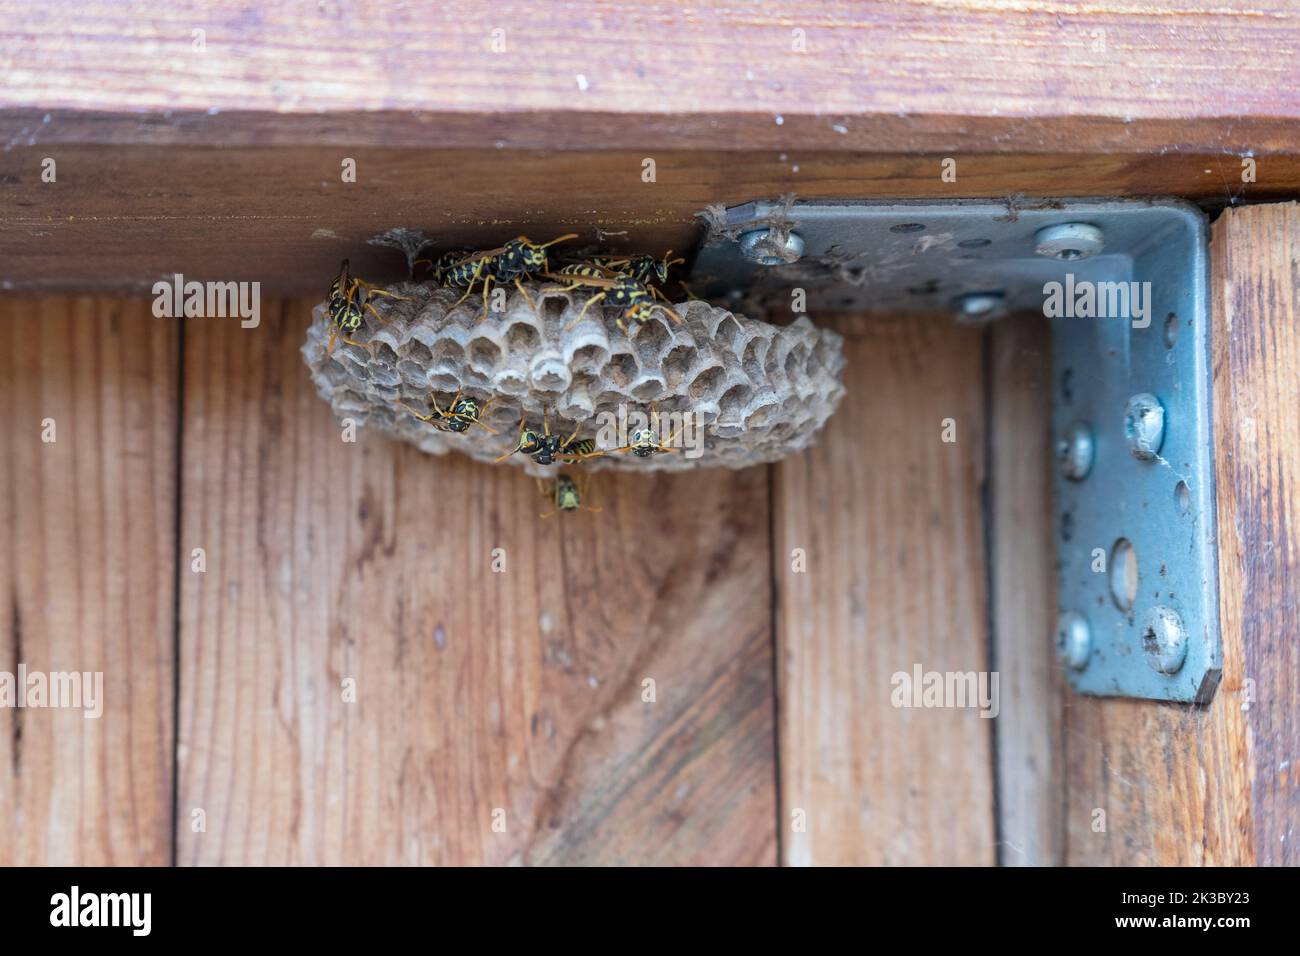 Wasp nest with wasps Stock Photo